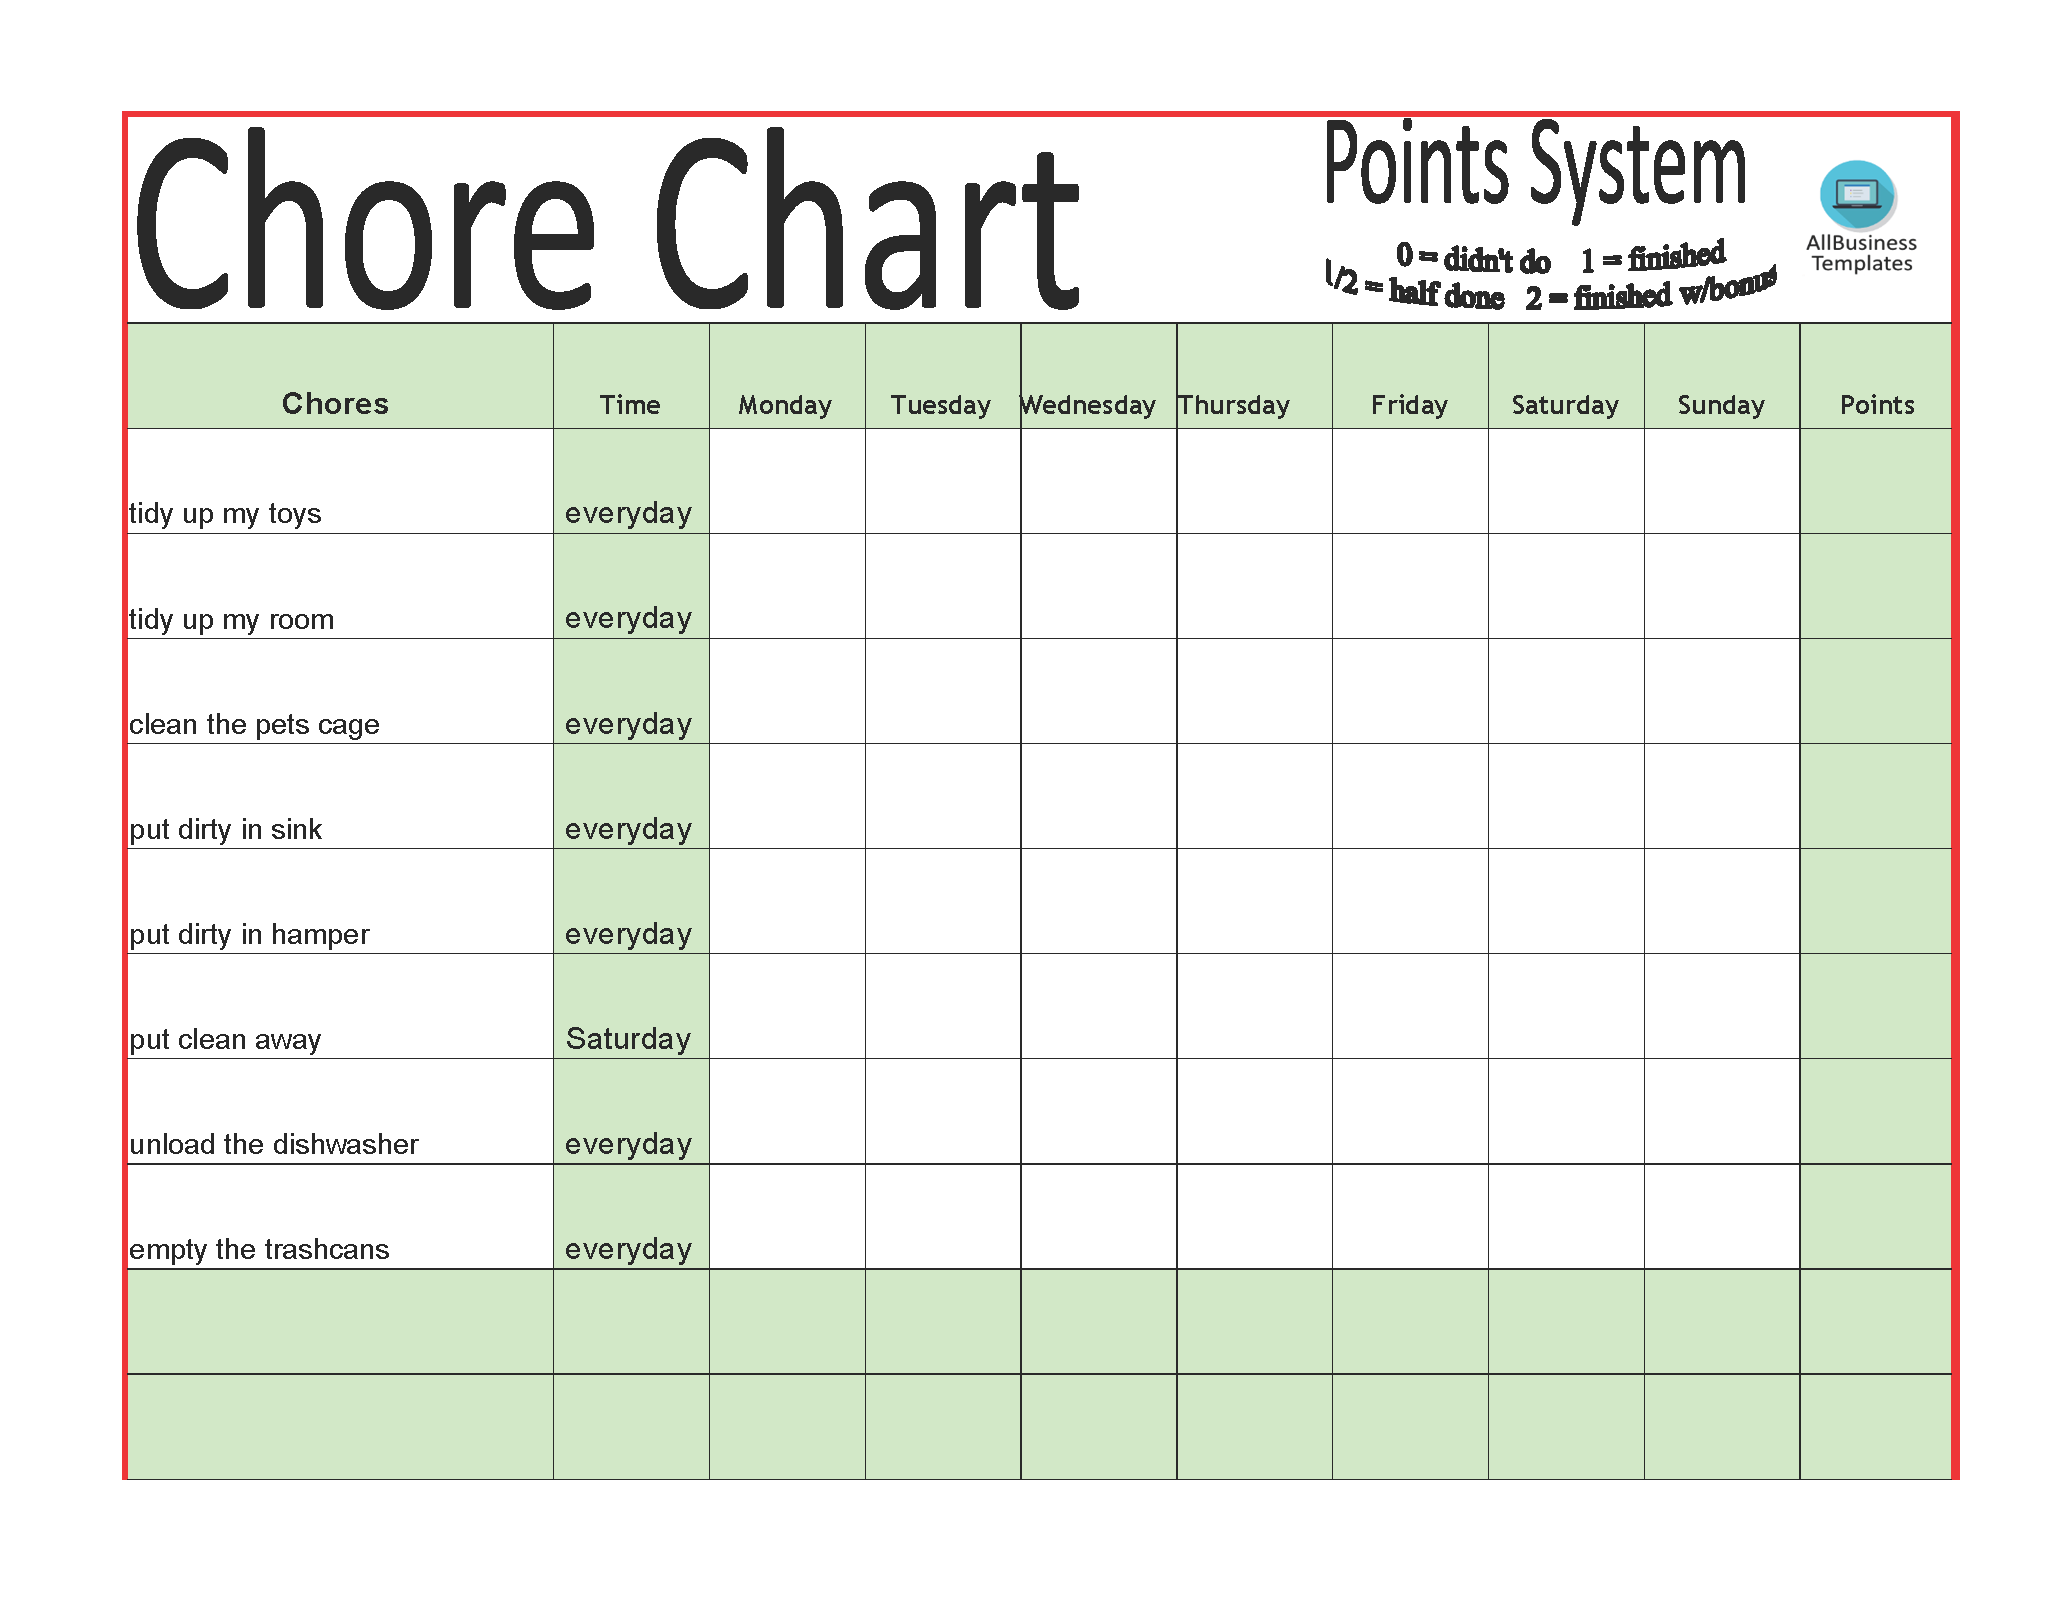 Chore chart Template in excel 模板